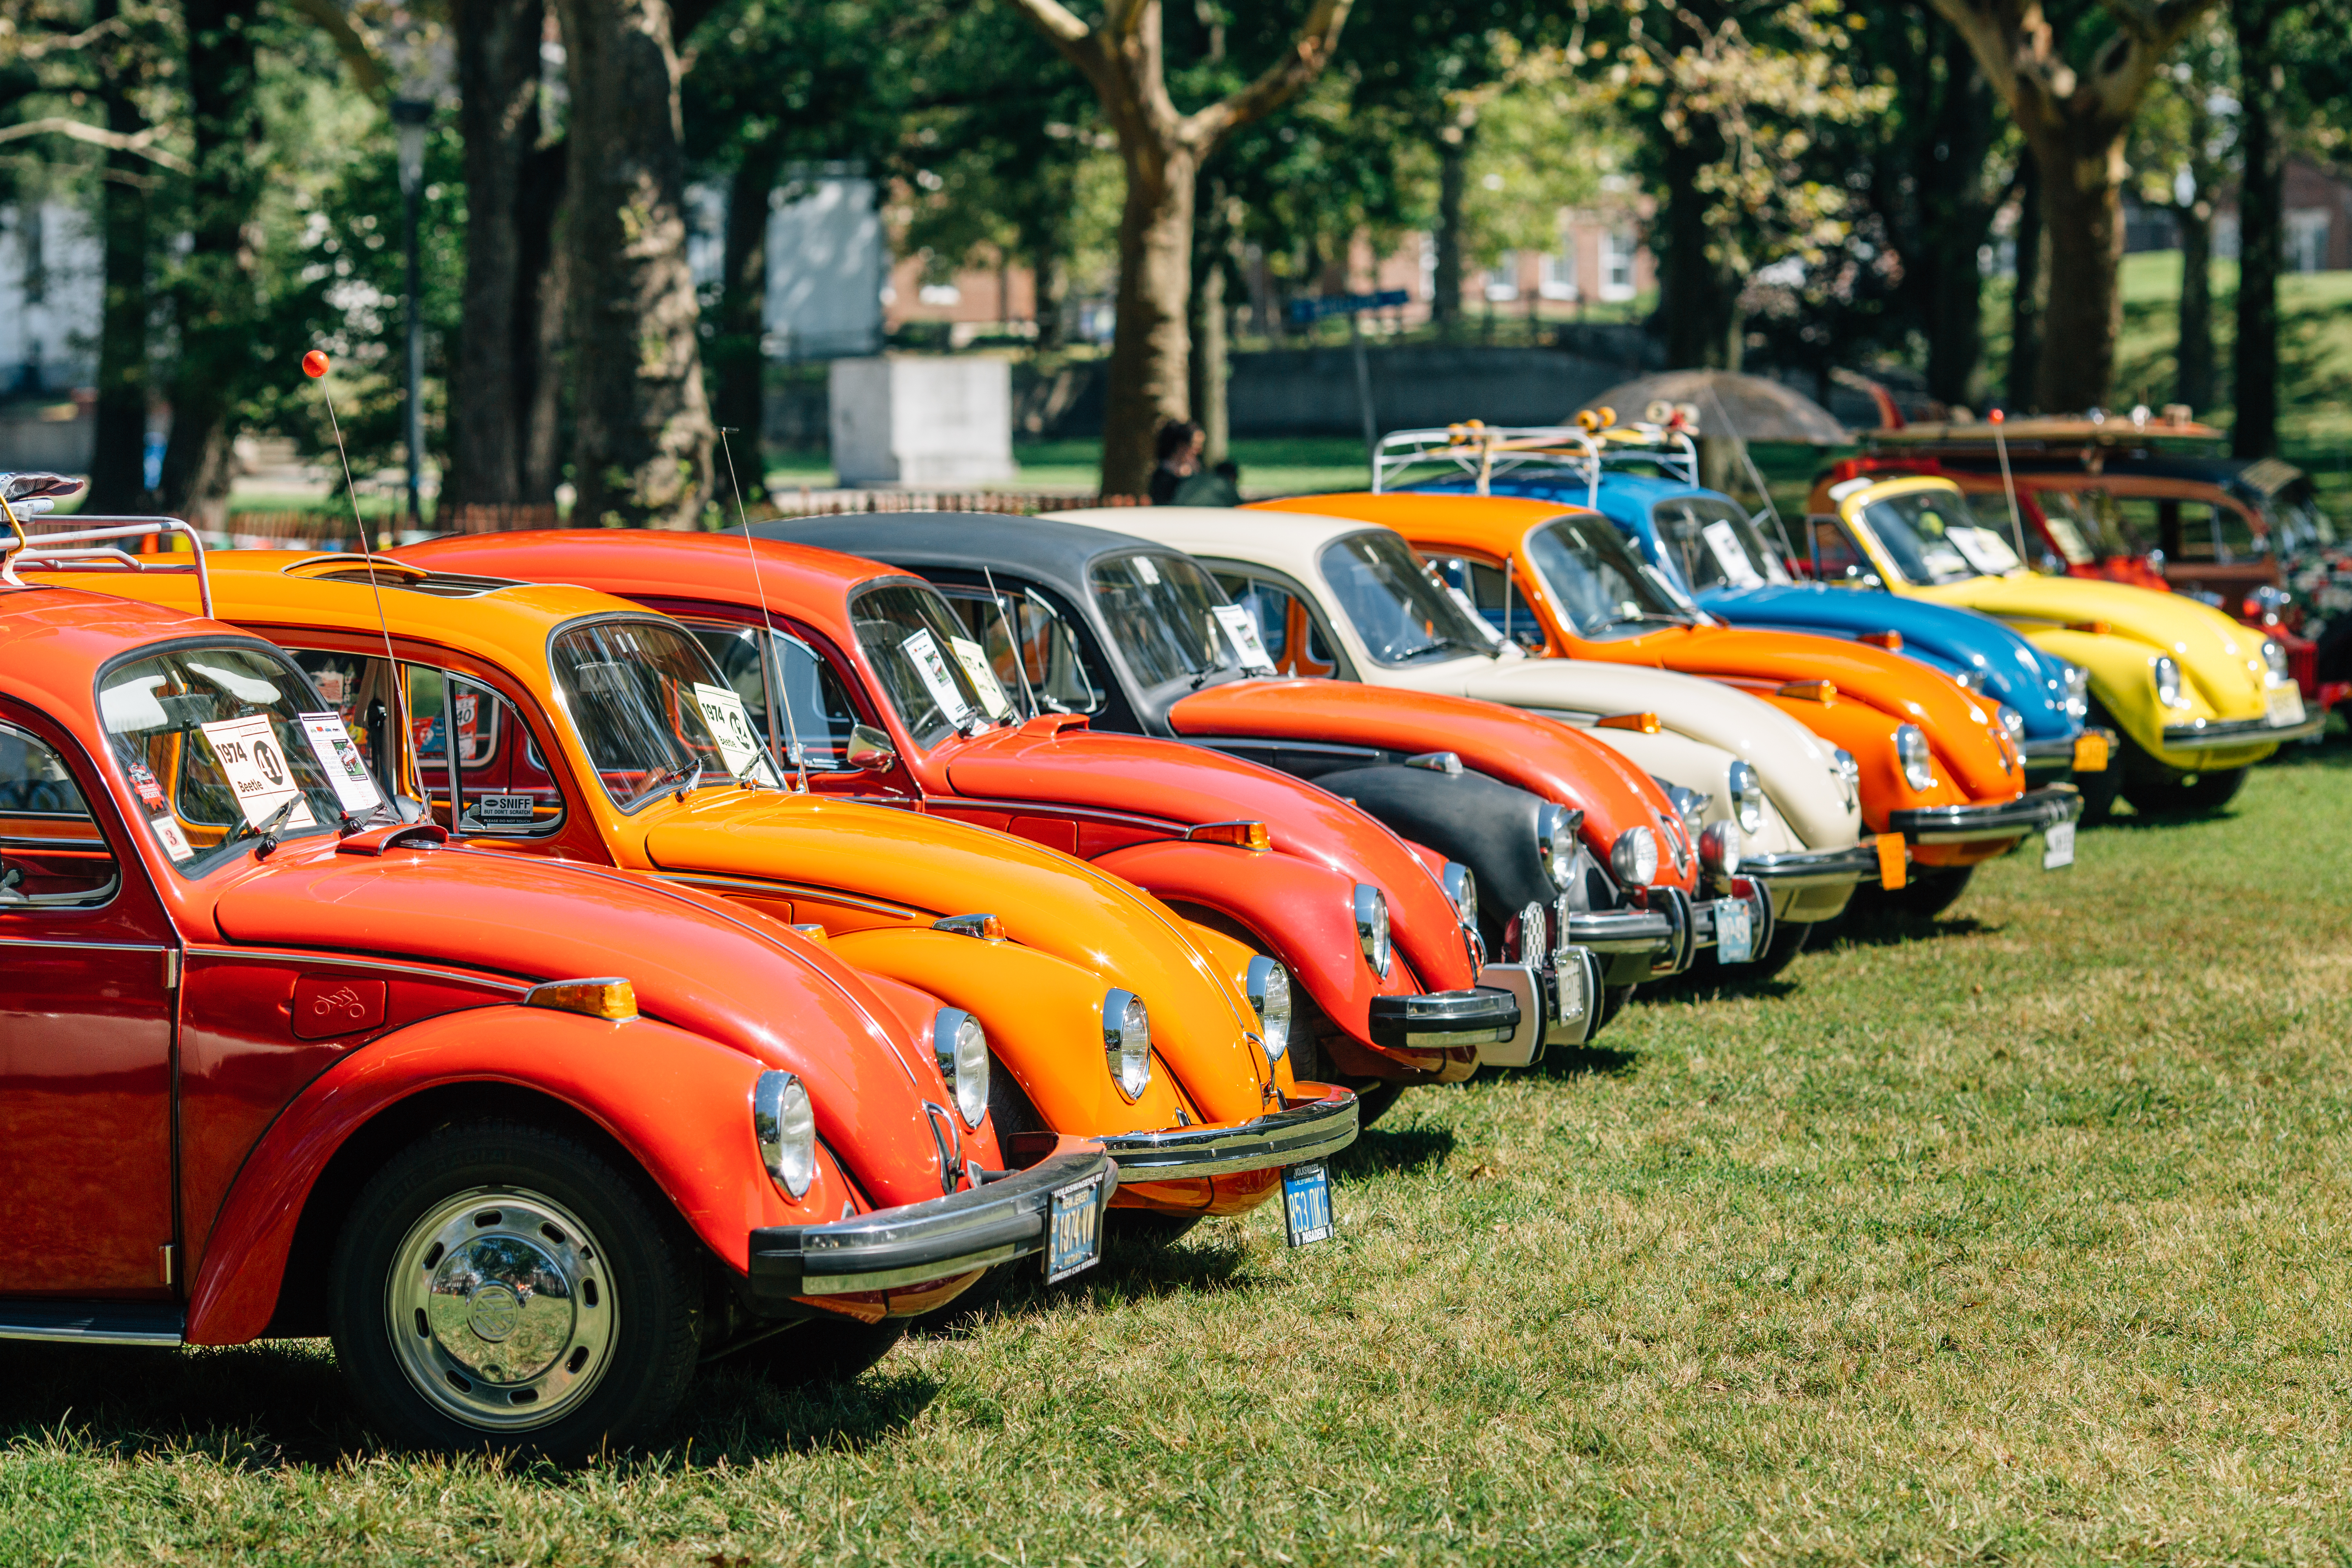 The VW Bug has changed significant since these retro air cooled models.